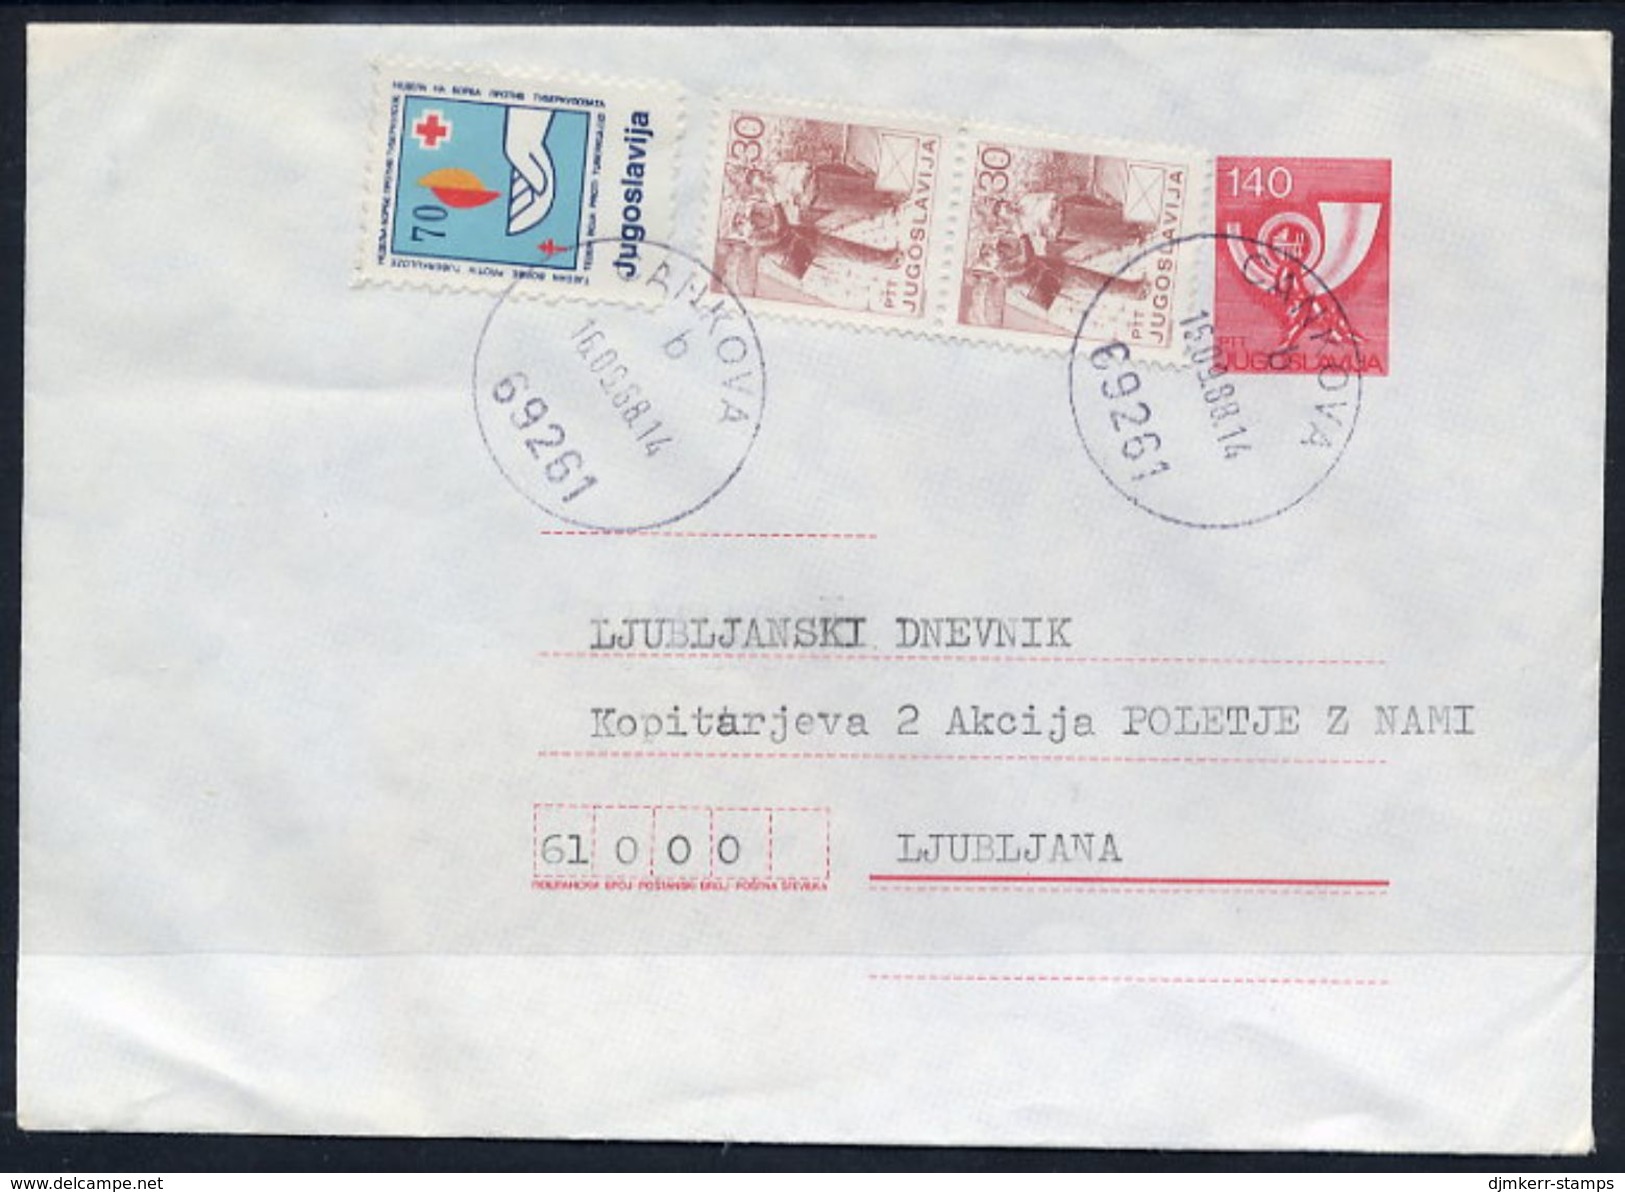 YUGOSLAVIA 1988 Posthorn 140 D.stationery Envelope Used With Additional Franking And TB Week Tax.  Michel U81 - Postal Stationery